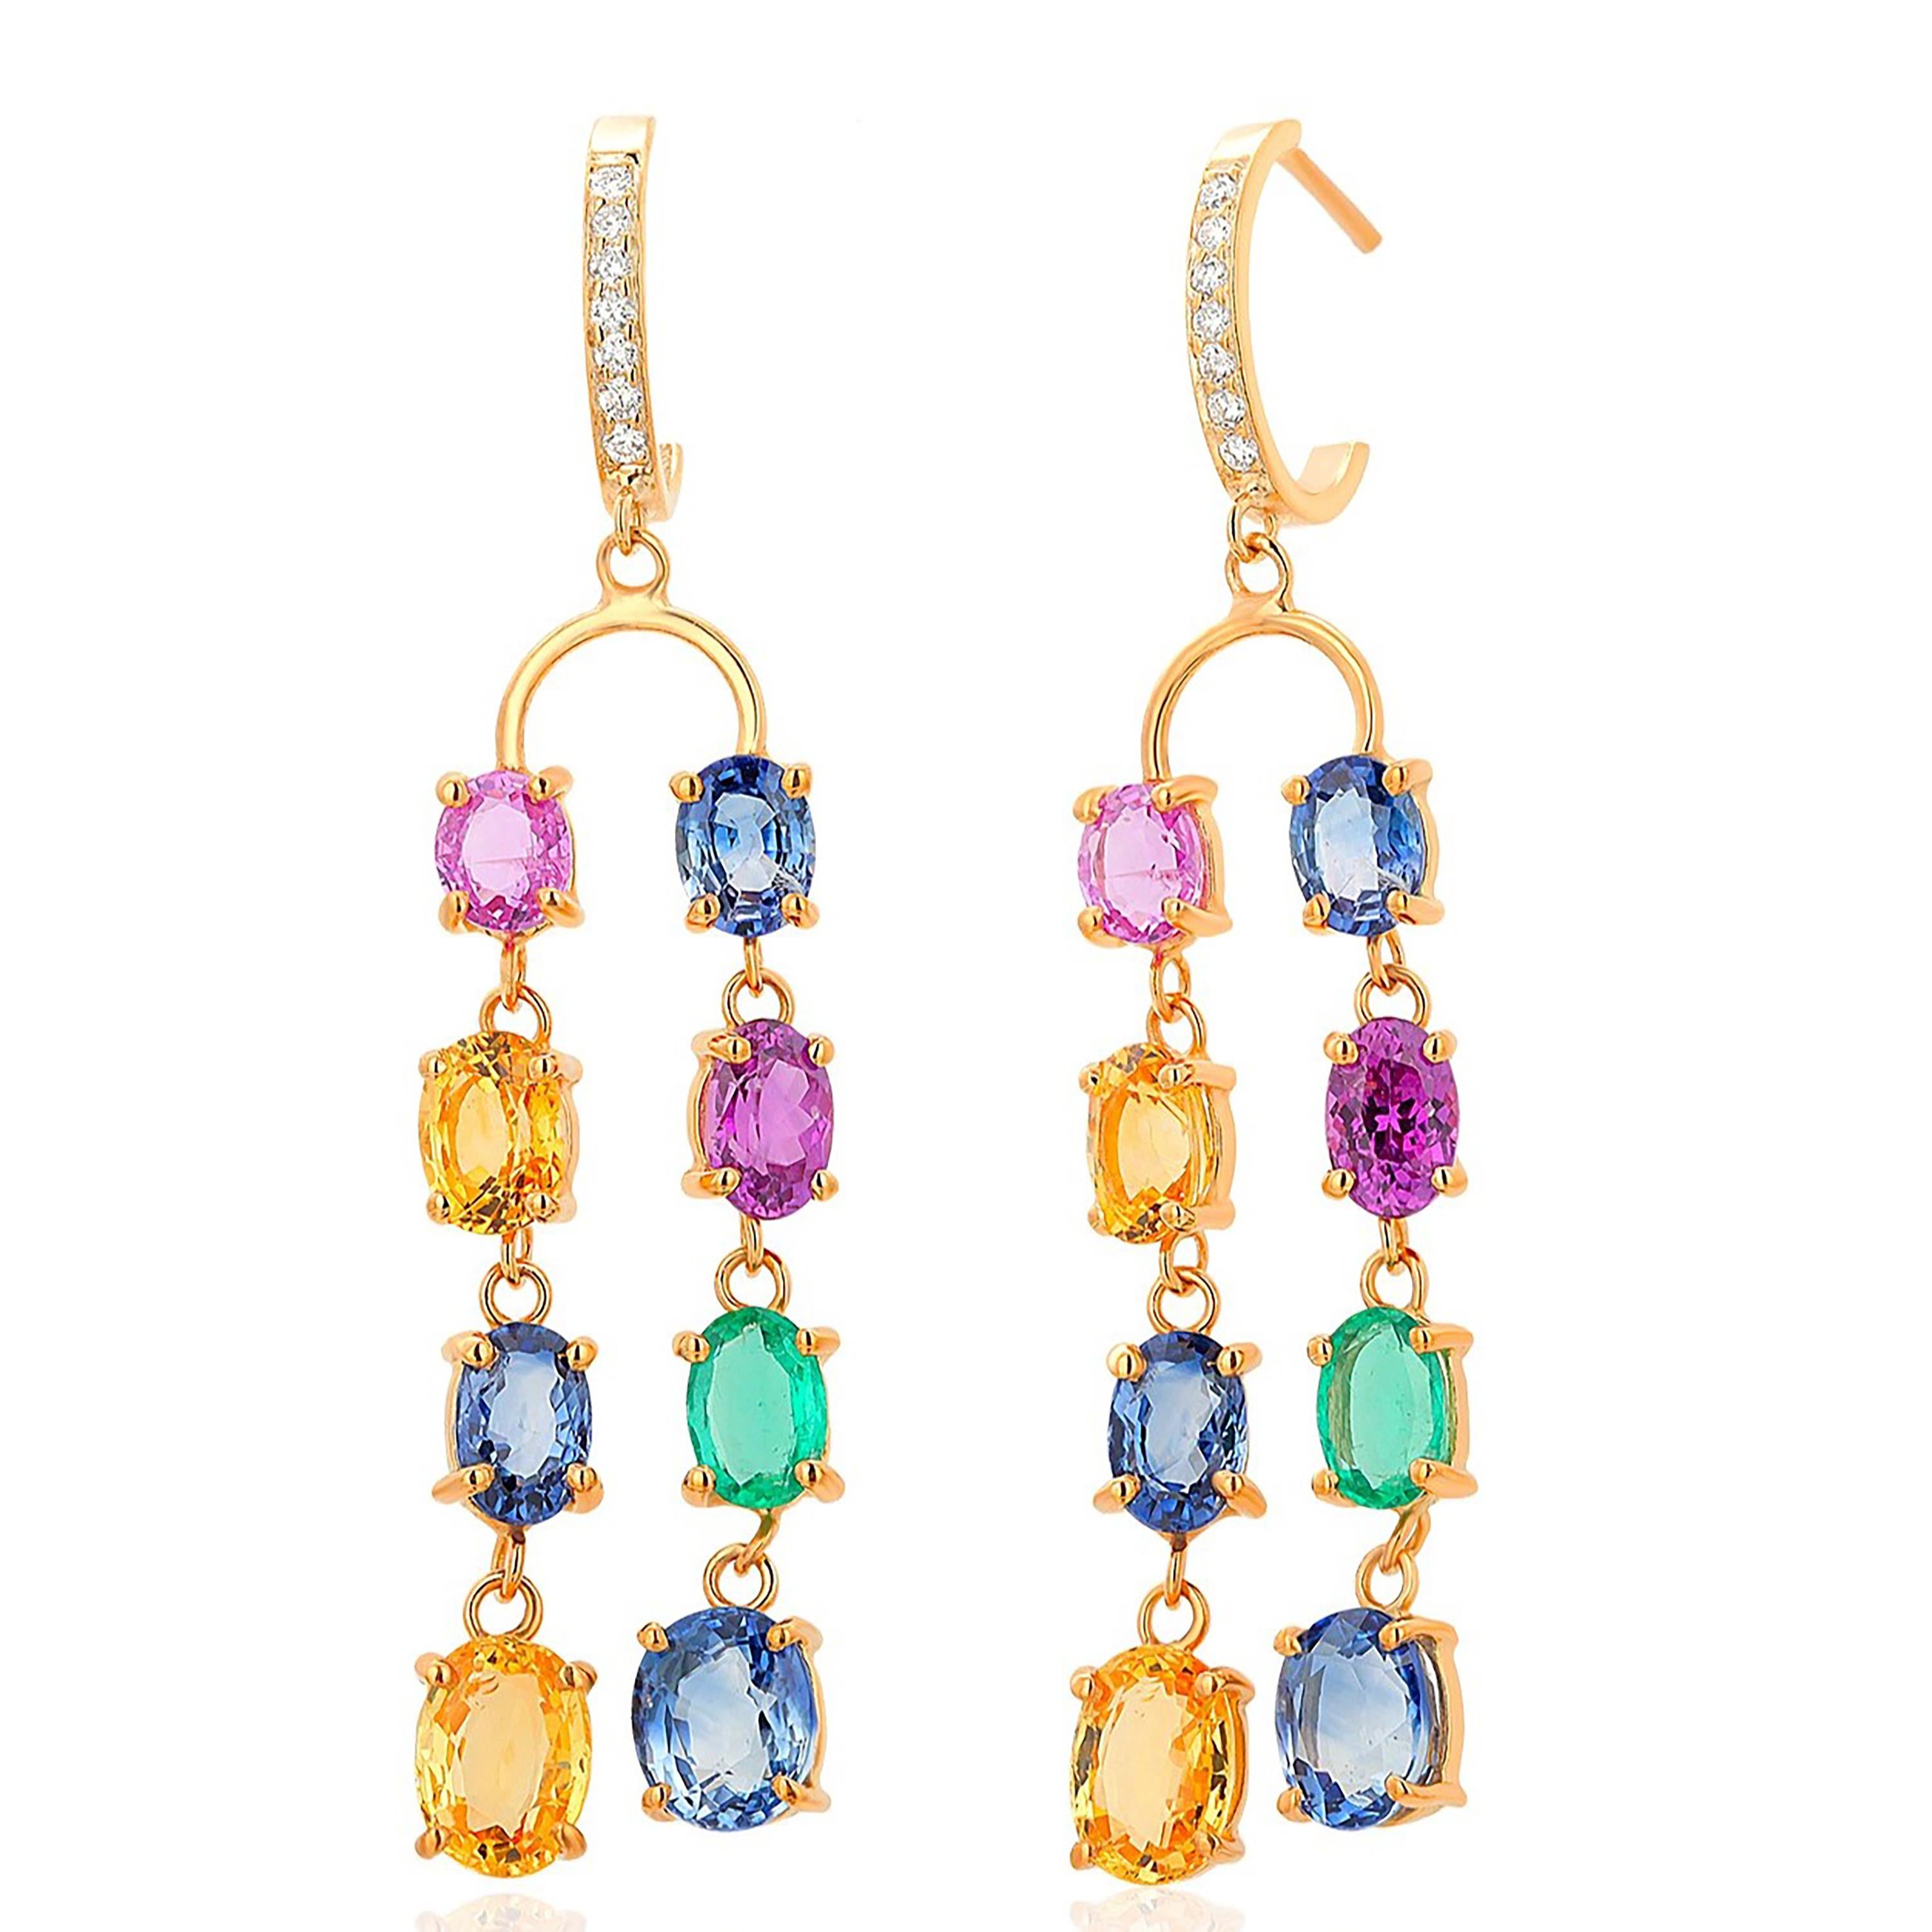 Oval Cut Double Lined Multi-Colorful Precious Stones 11.35 Carat 2 Inch Hoop Earrings For Sale